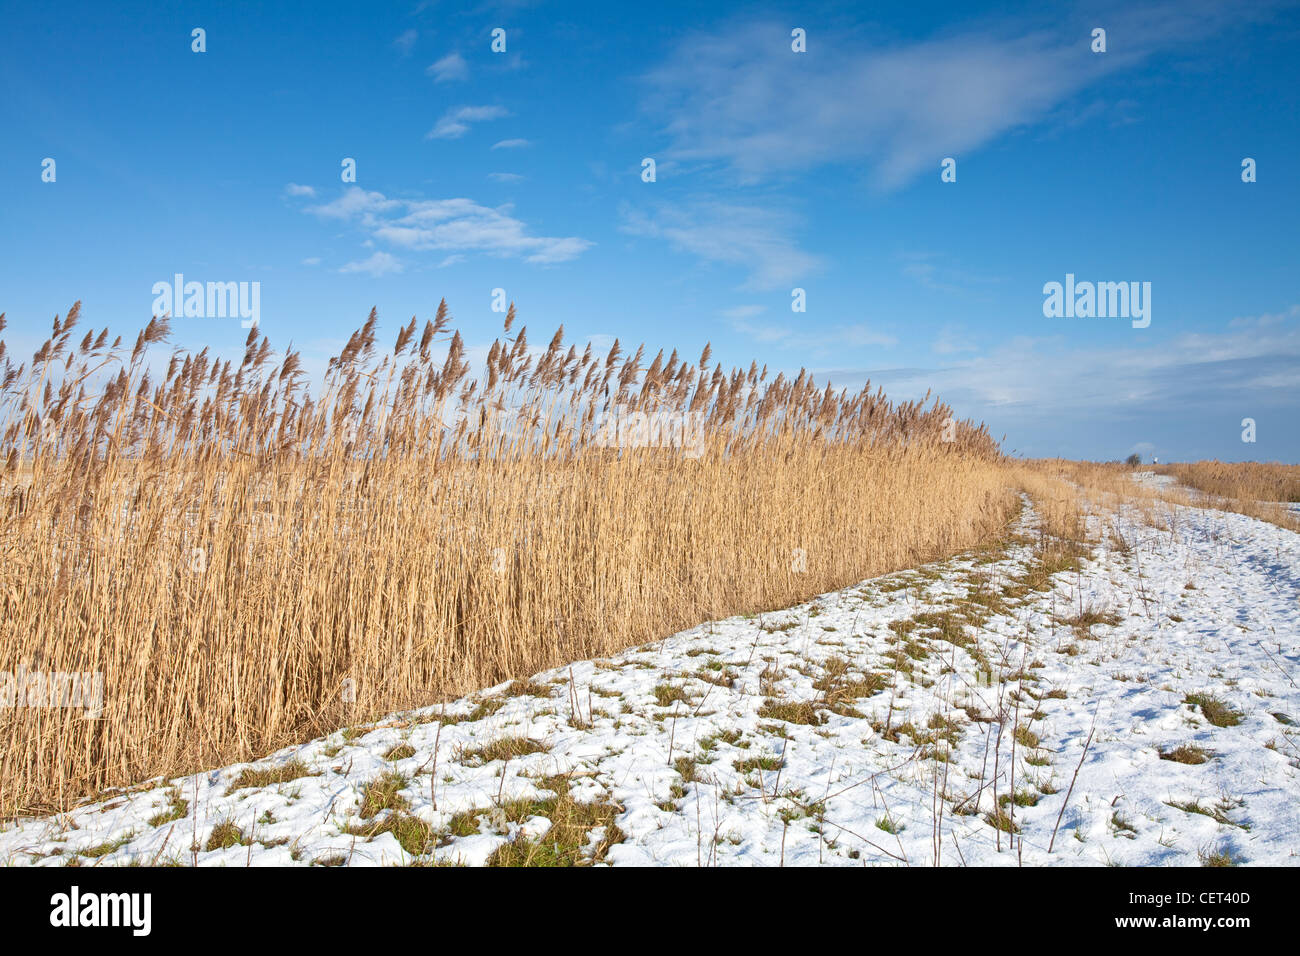 Reeds in the snow on the Halvergate Marshes in the Norfolk Broads. Stock Photo